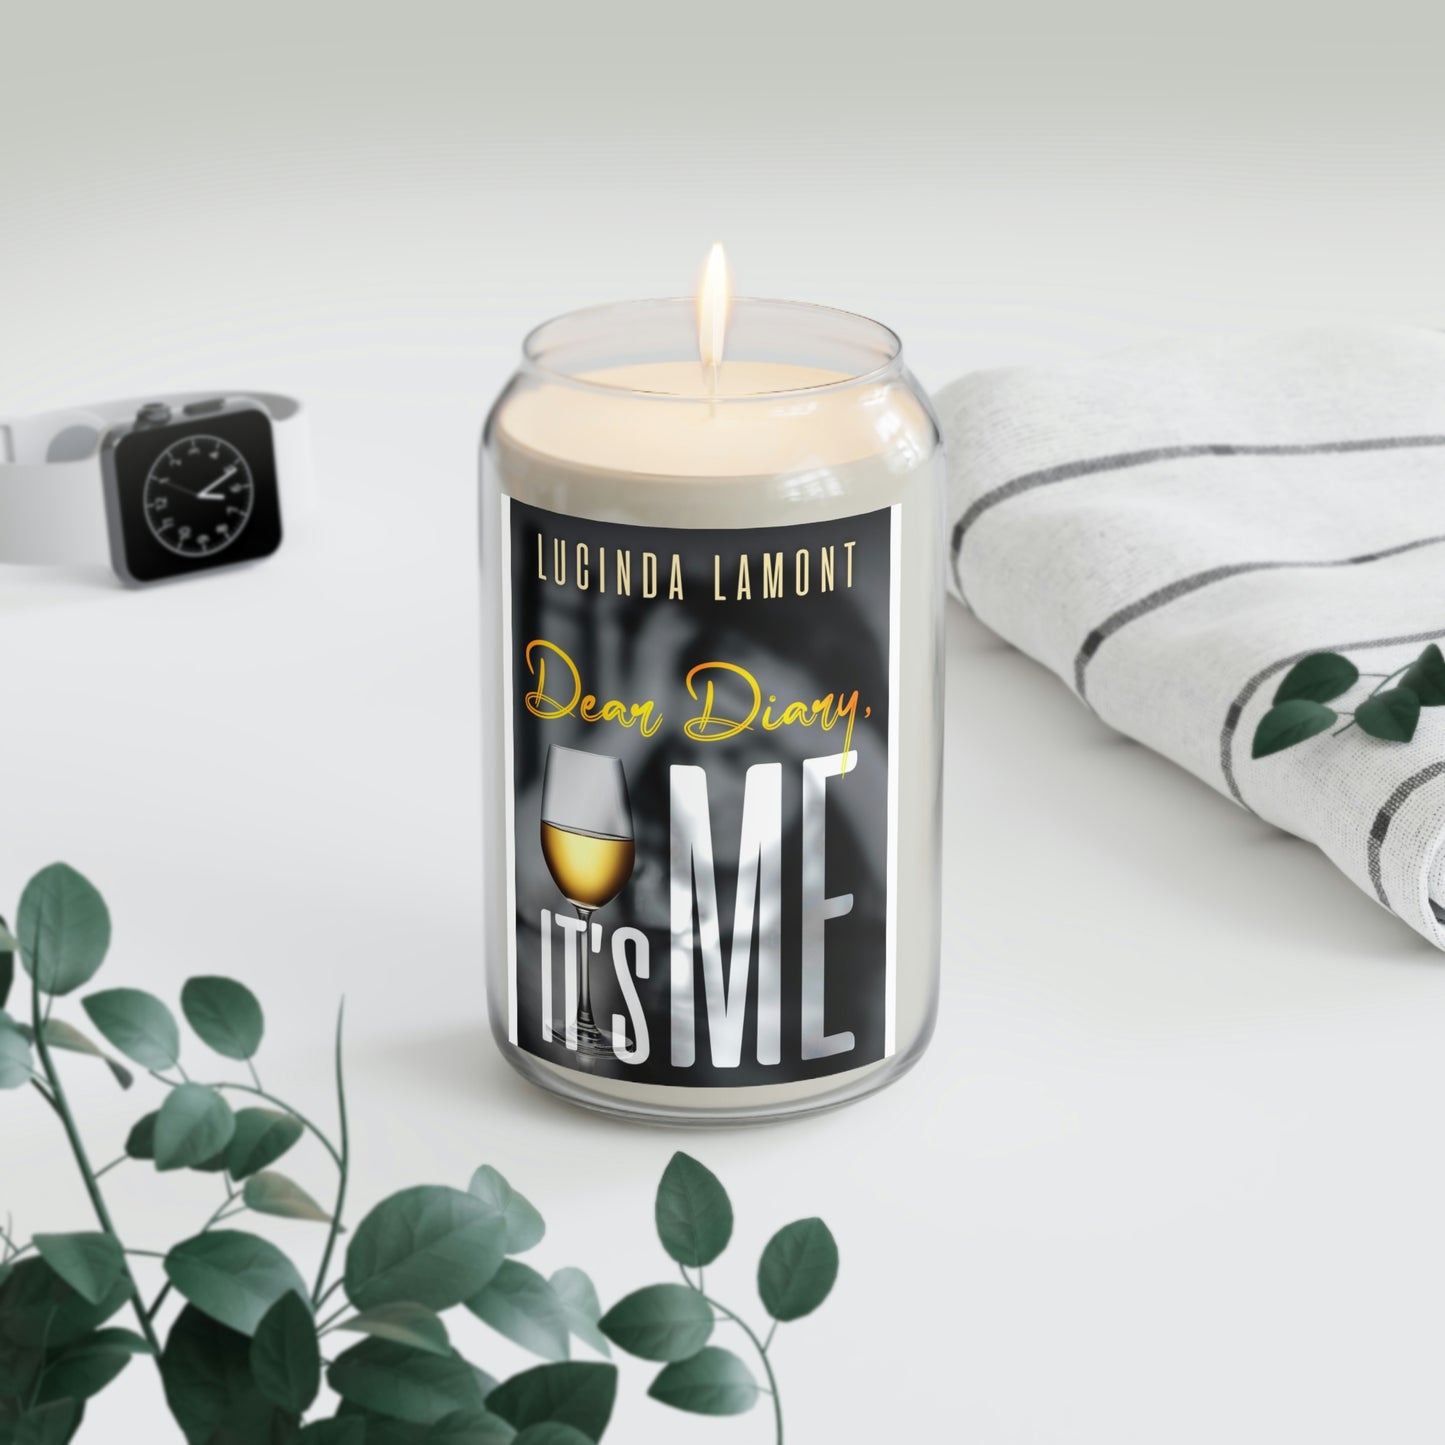 Dear Diary, It's Me - Scented Candle